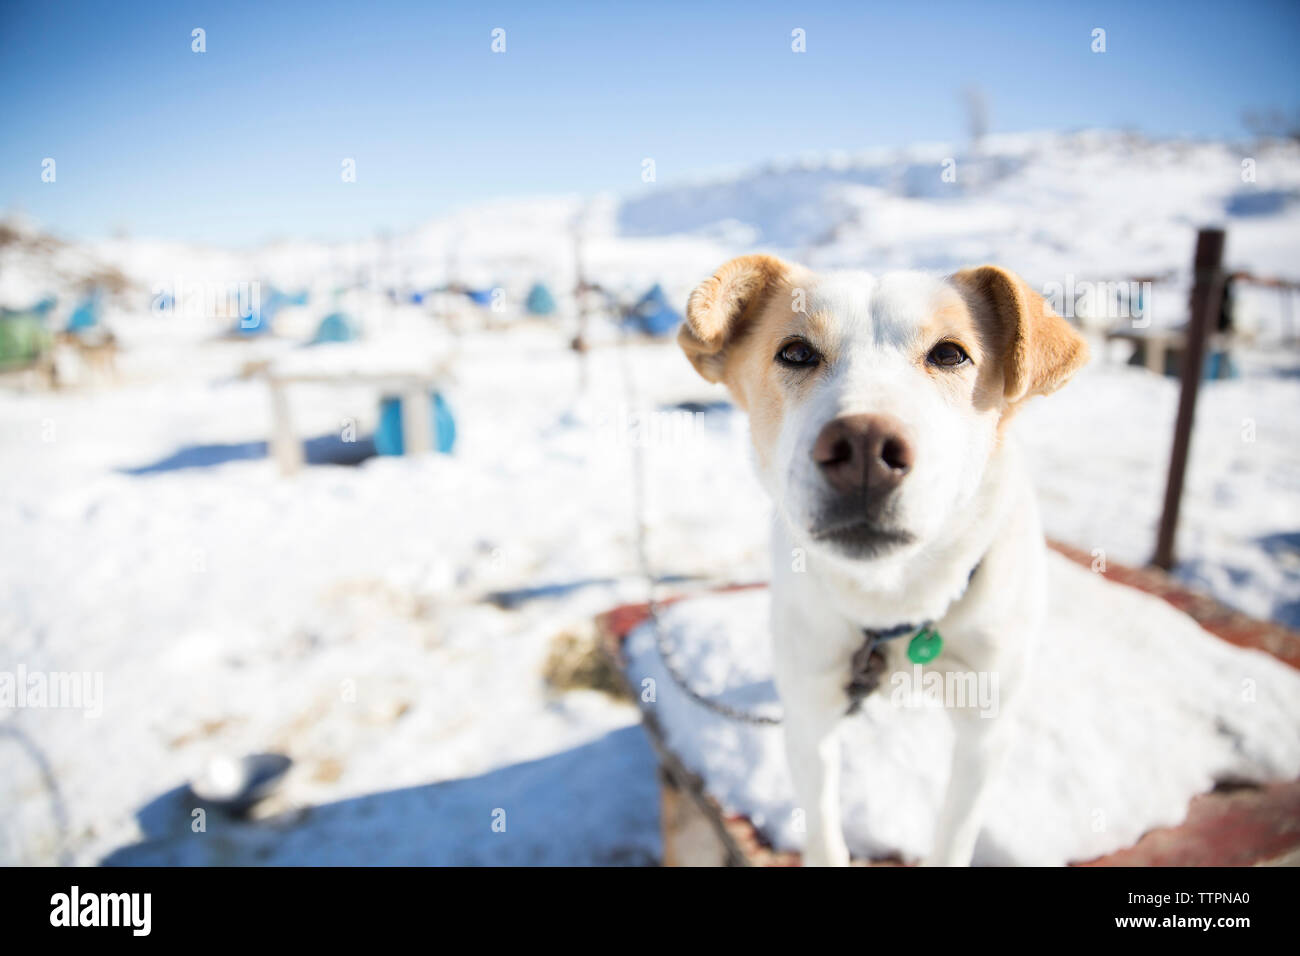 Portrait of dog standing on table during winter Stock Photo